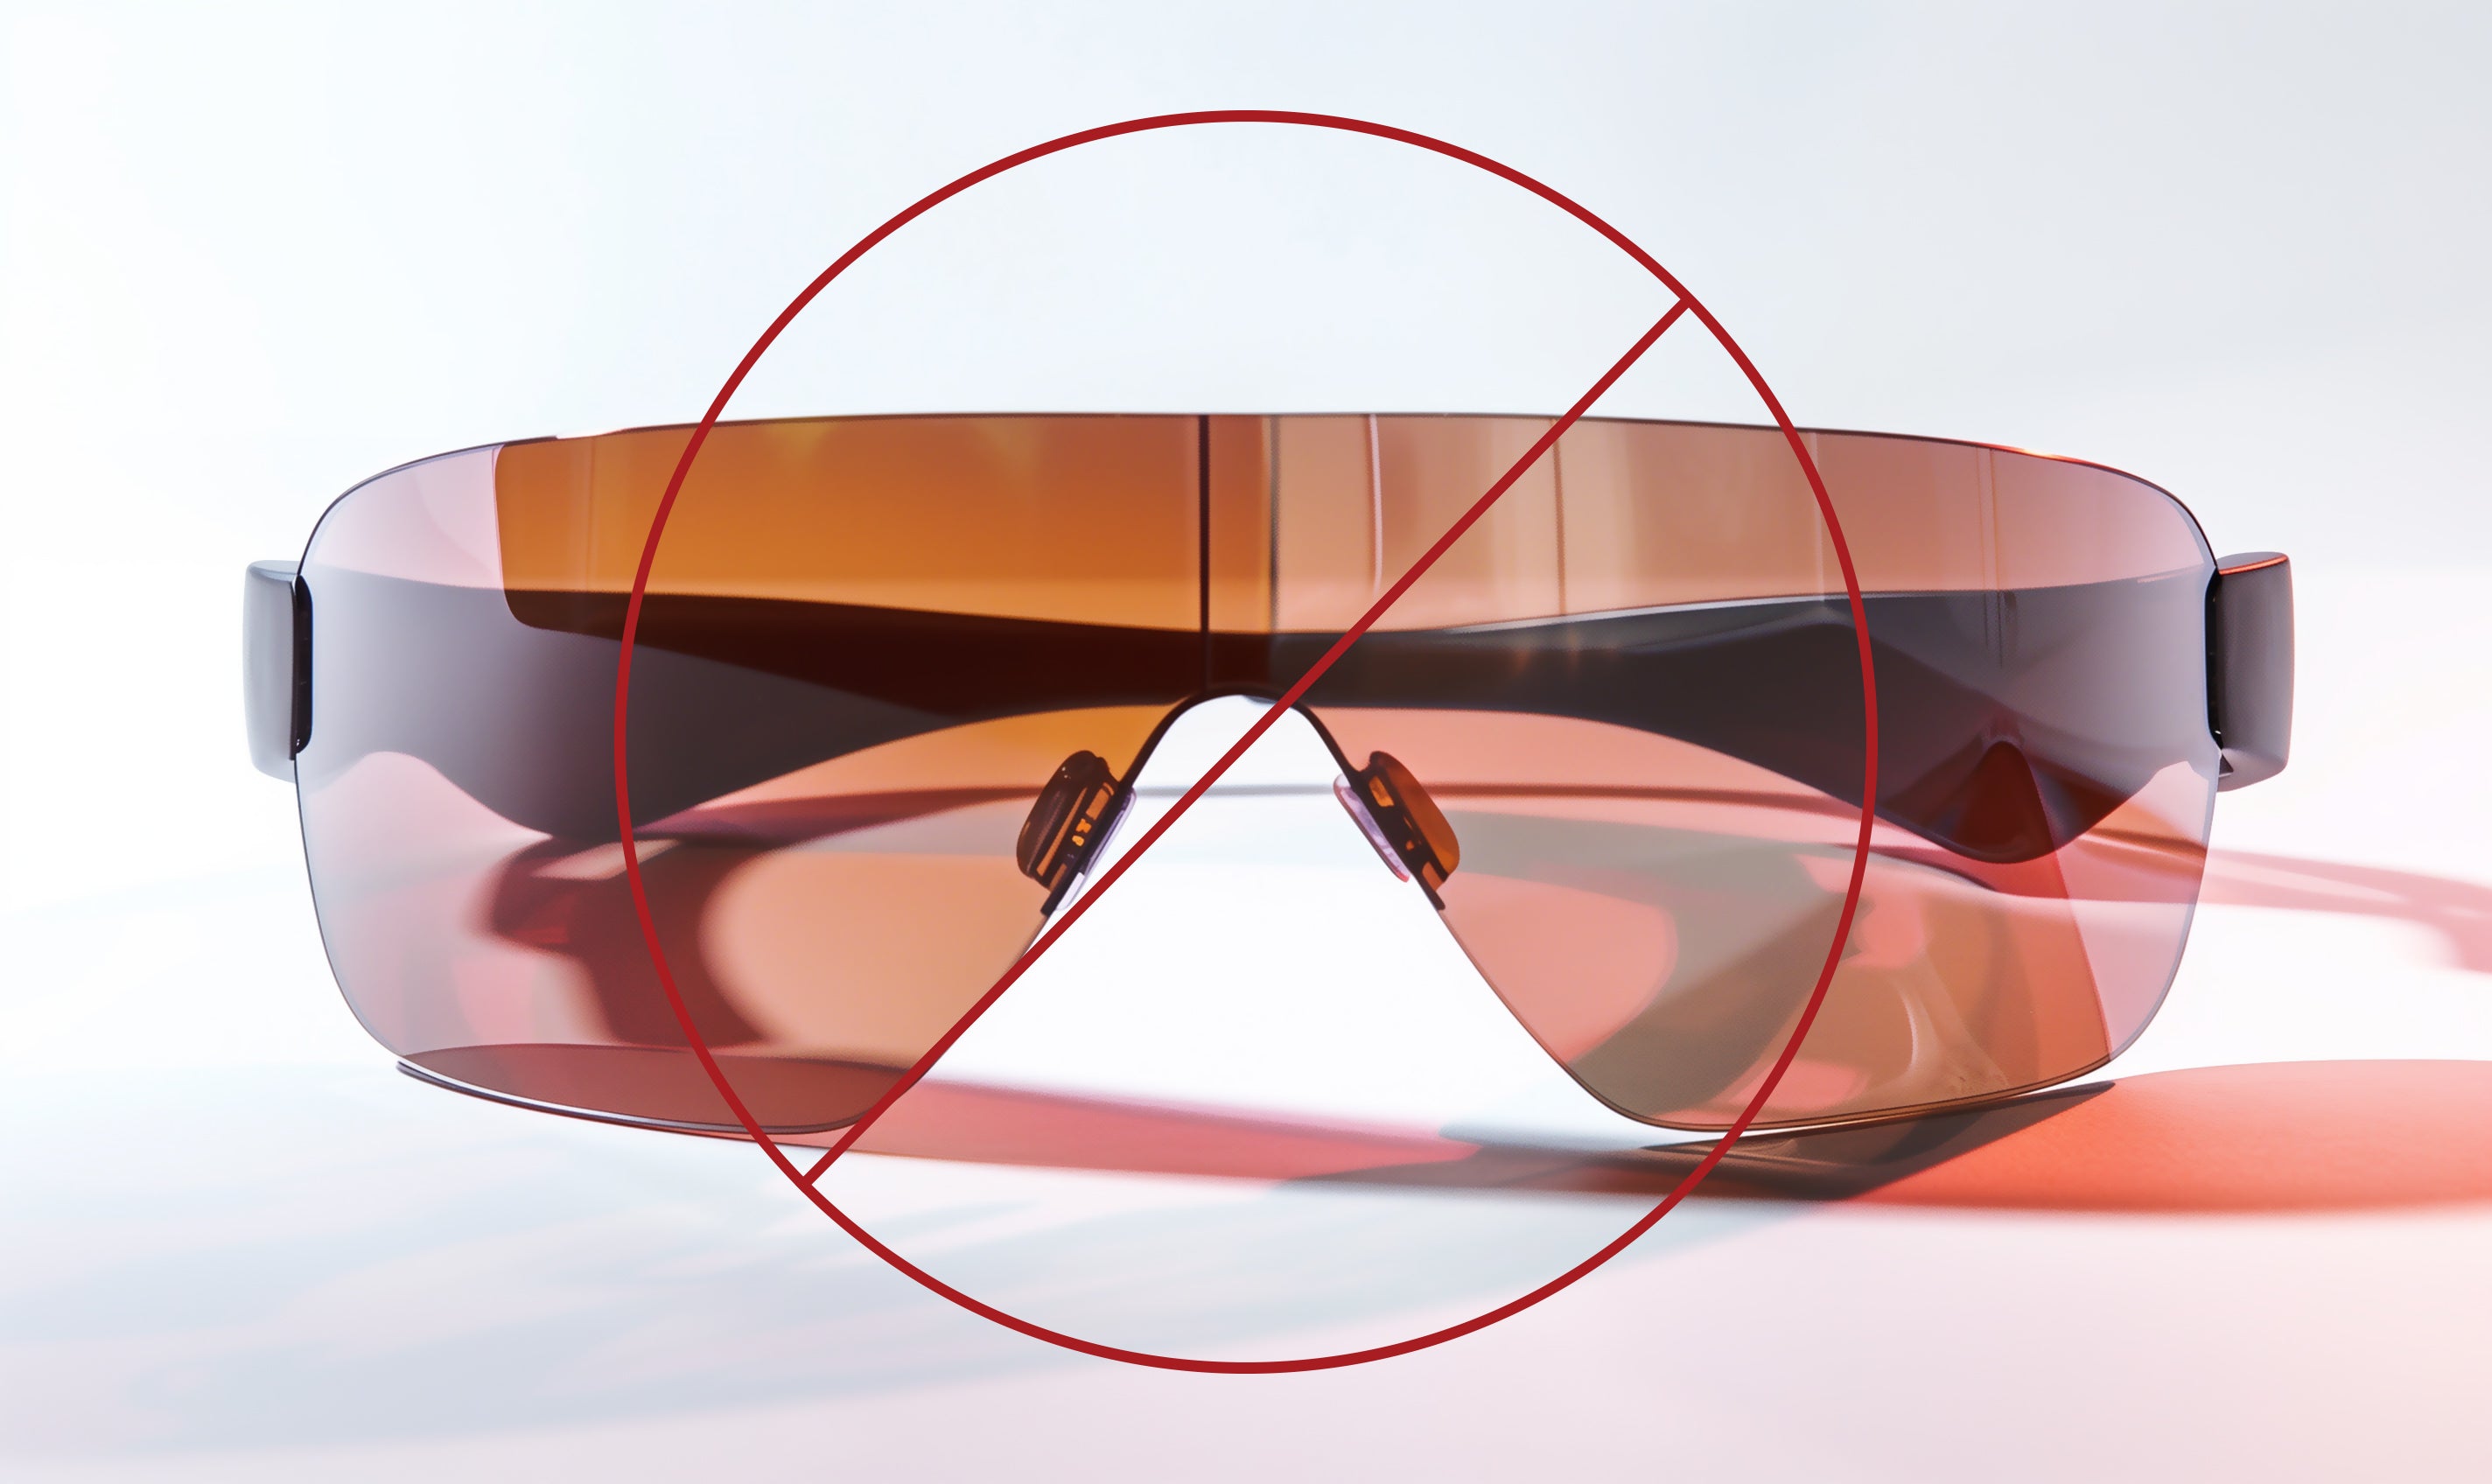 Image of curved sunglasses being struck thru